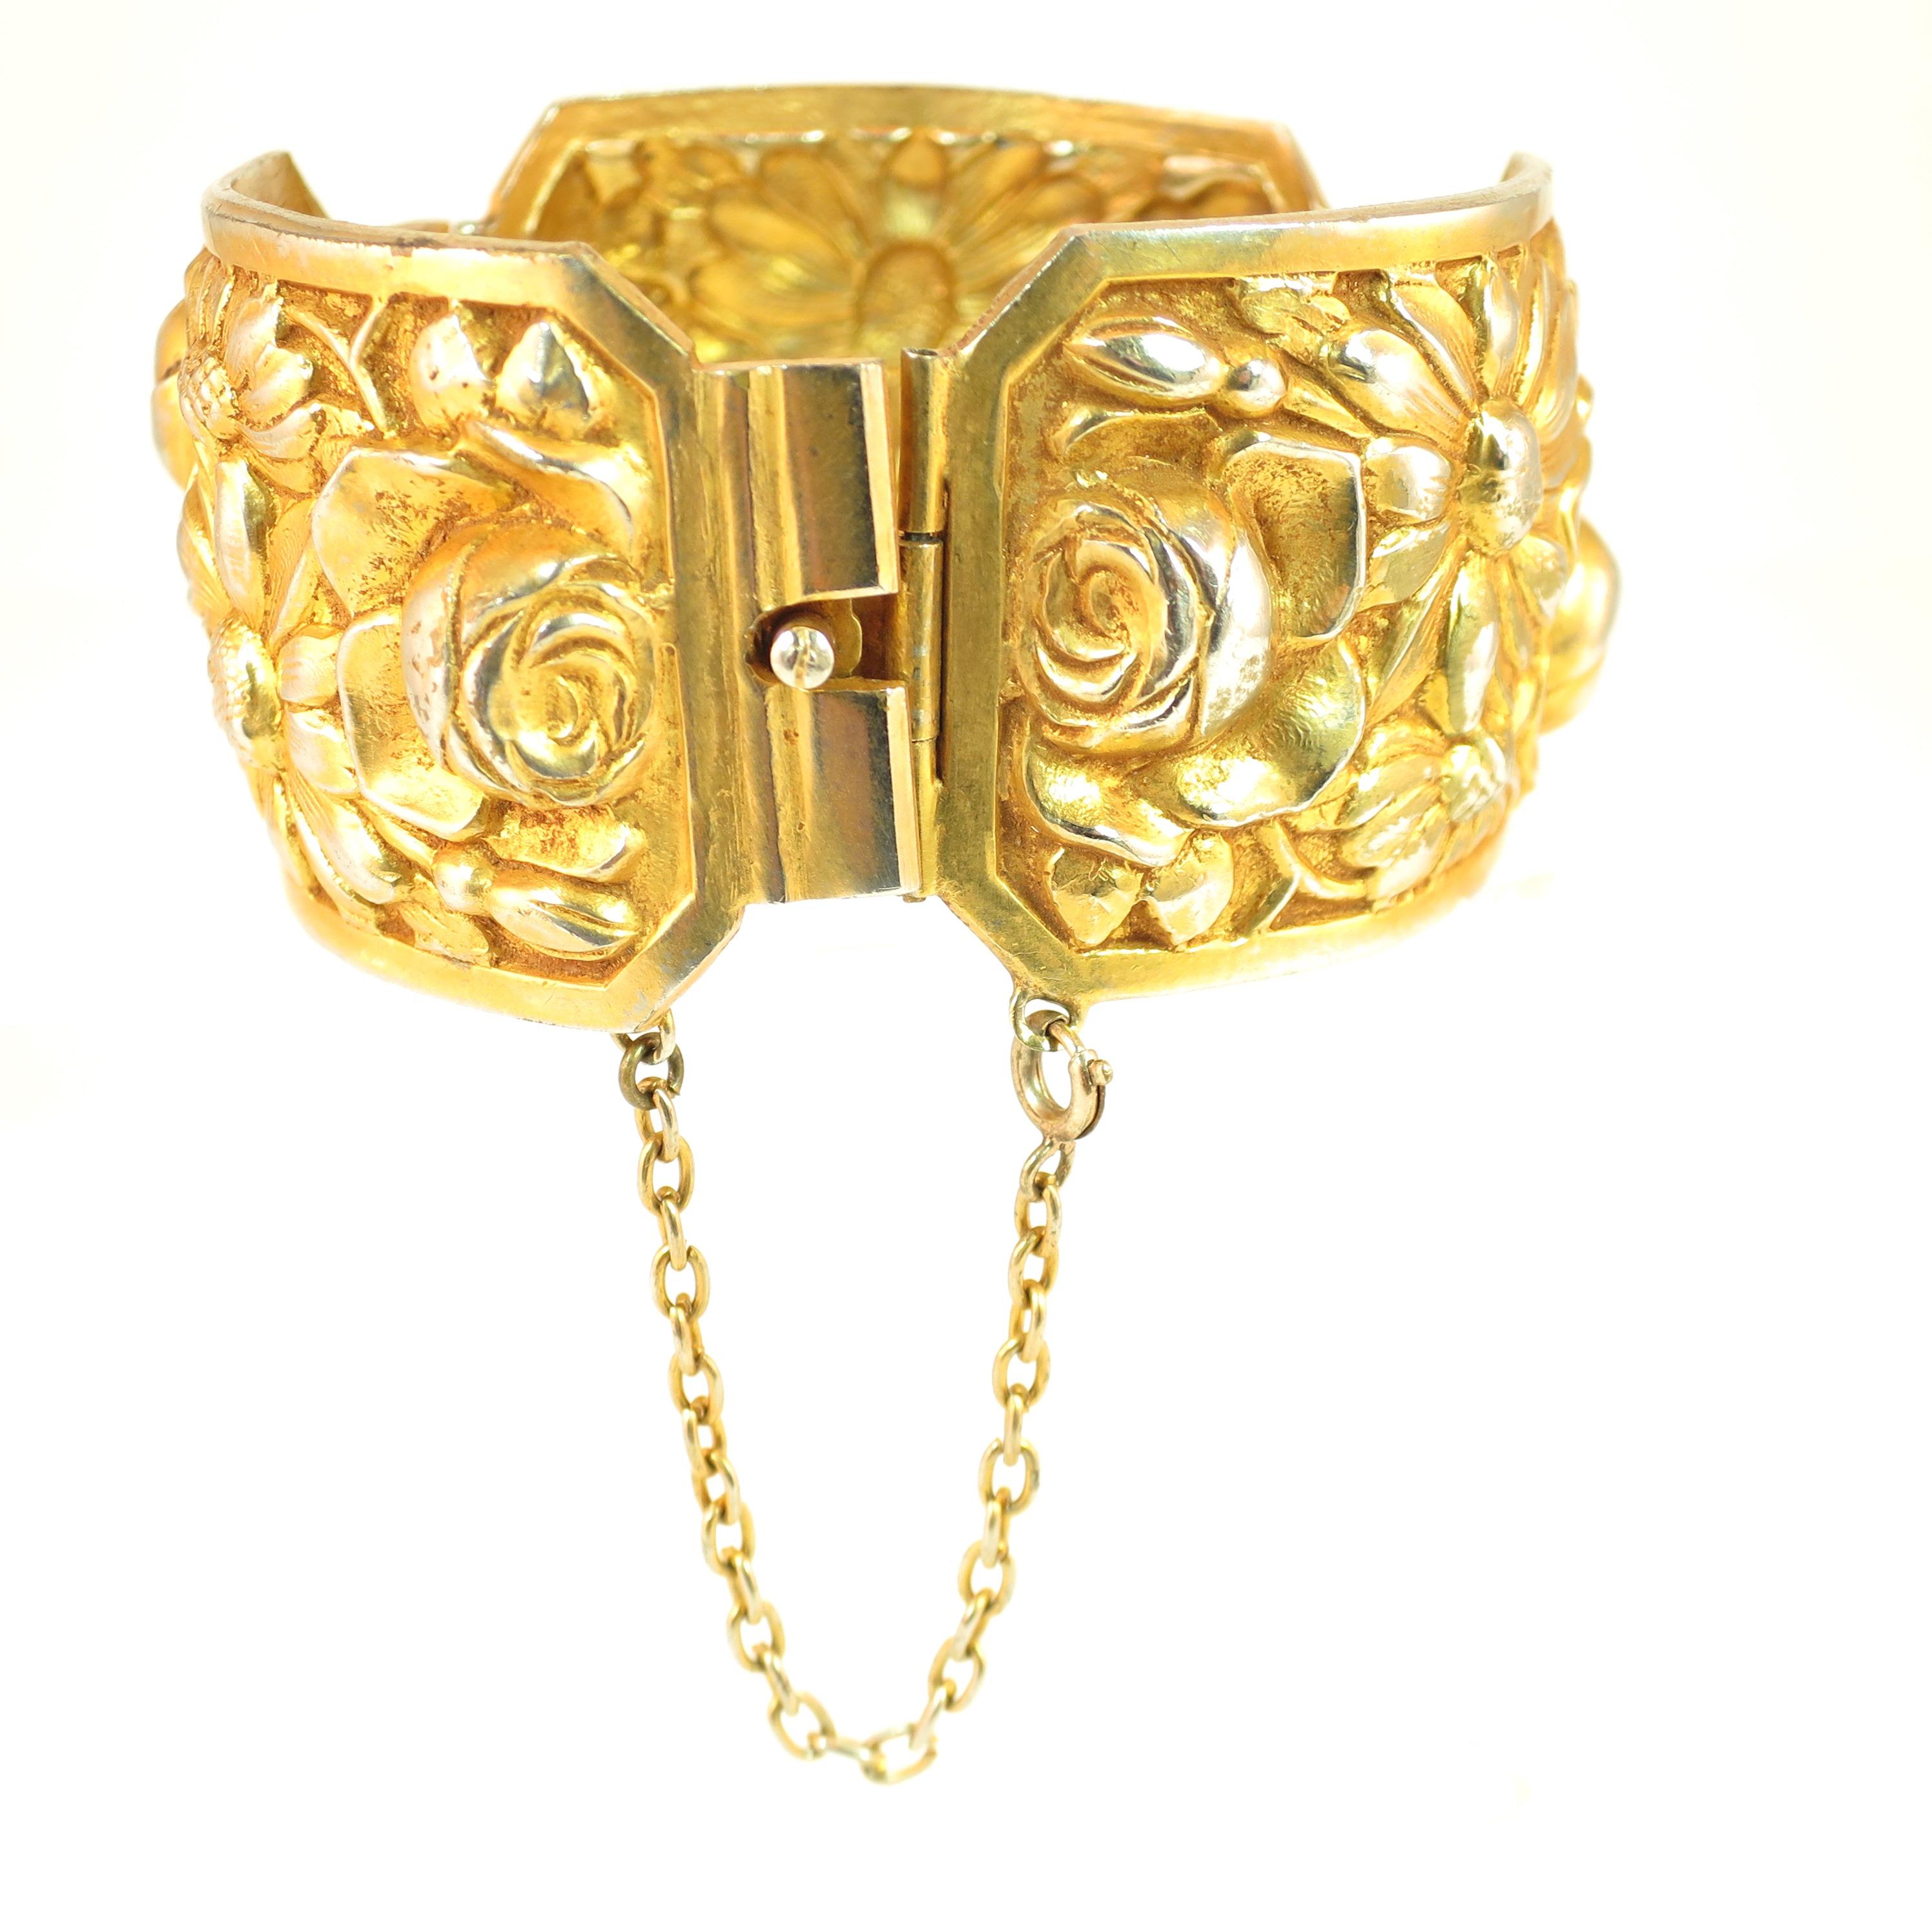 French Art Deco Gilded Floral Repousse Hinged Bracelet, 1920s (Art déco) im Angebot